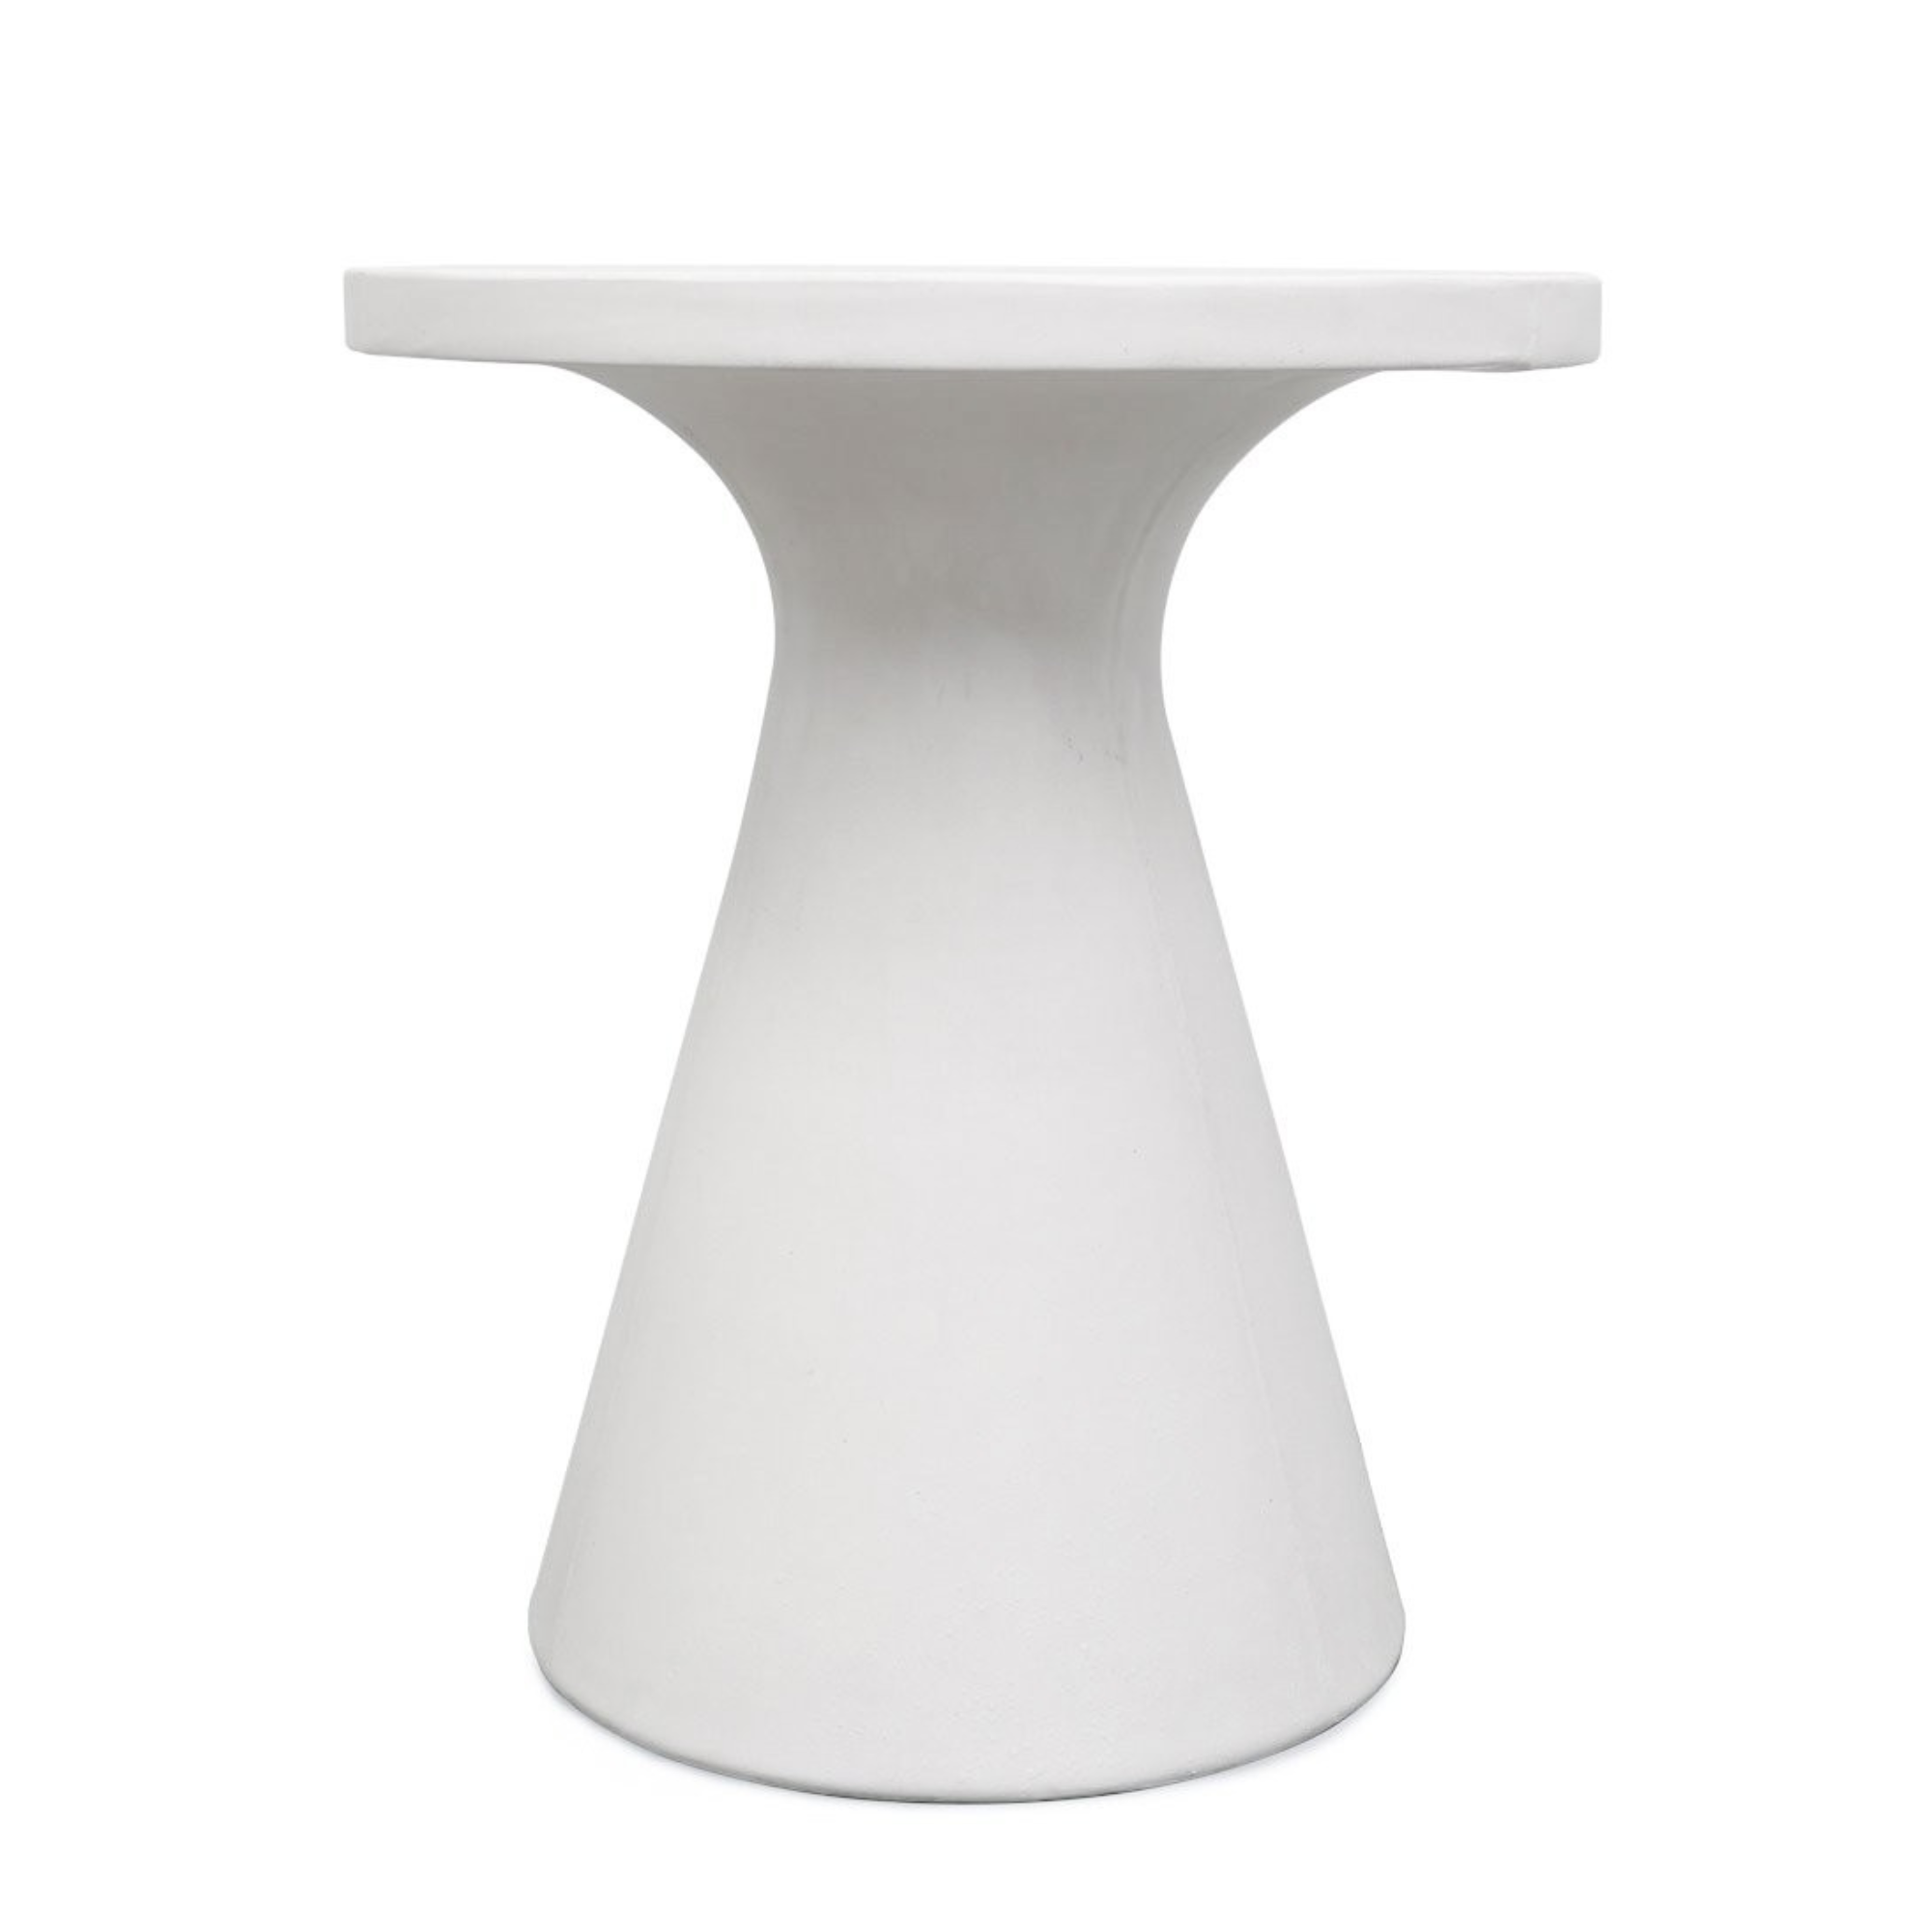 CORFU CONCRETE PEDESTAL SIDE OR SMALL DINING TABLE | WHITE OR GREY